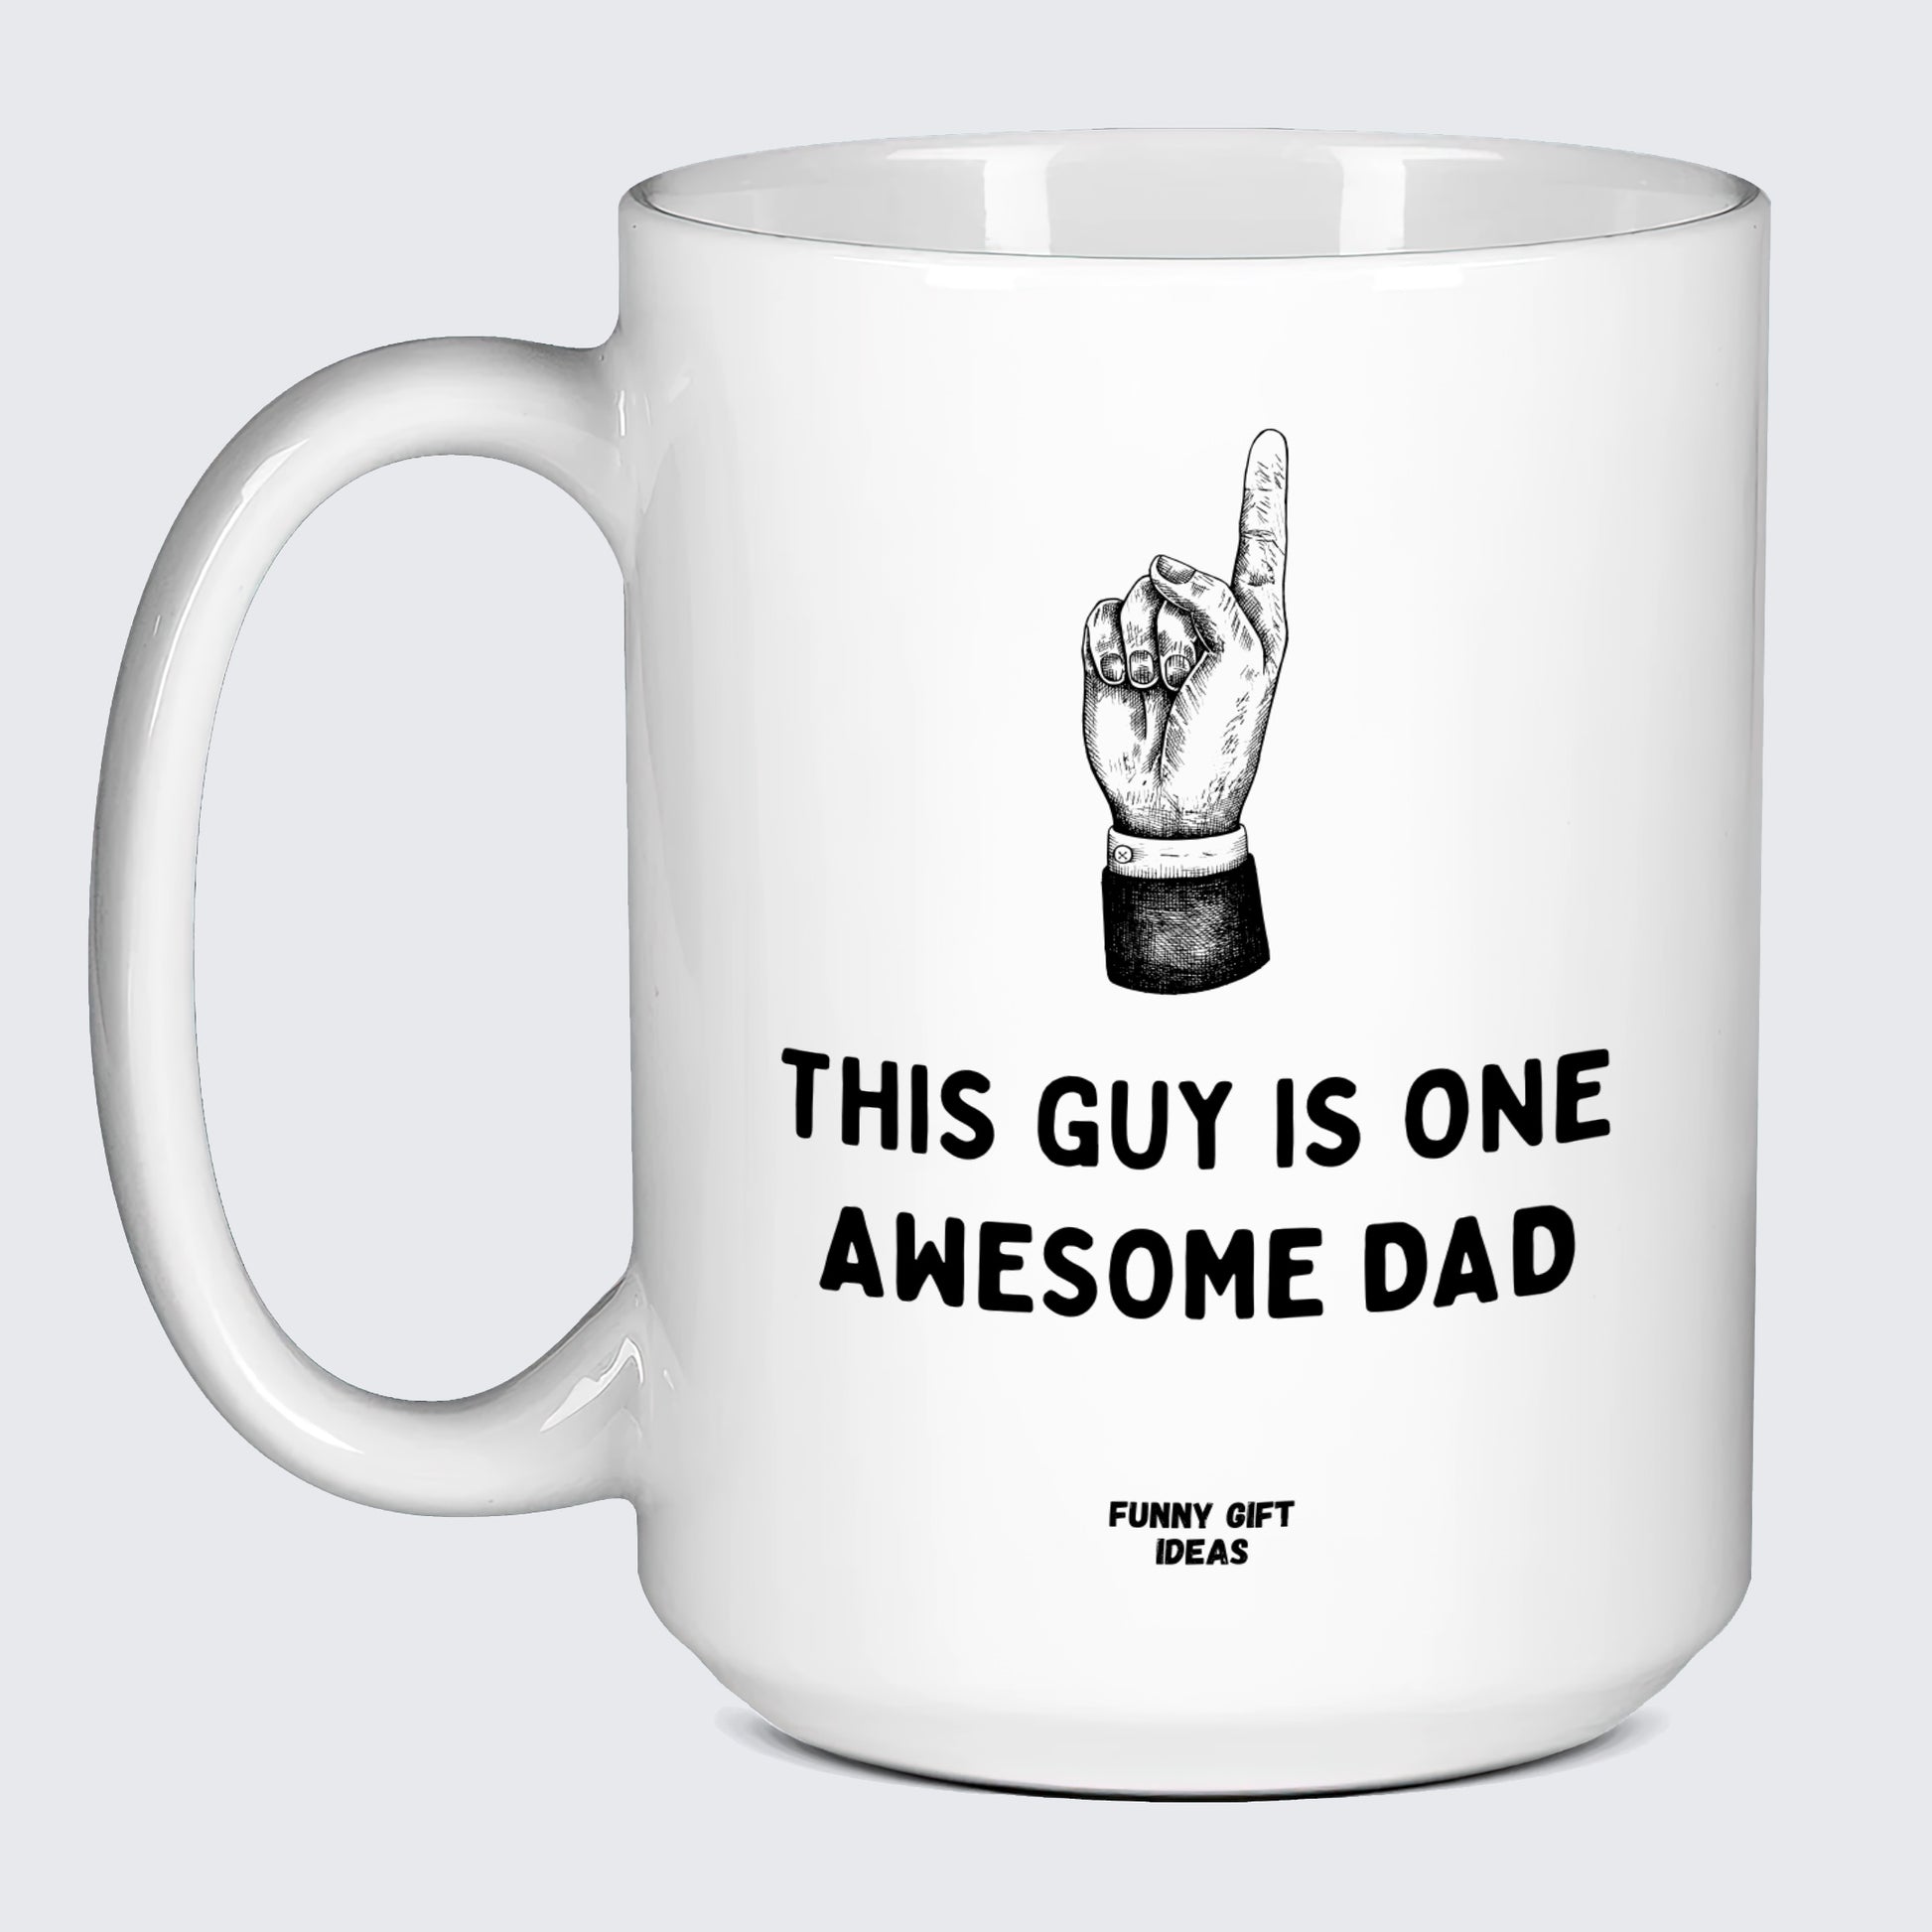 Good Gifts for Dad This Guy is One Awesome Dad - Funny Gift Ideas